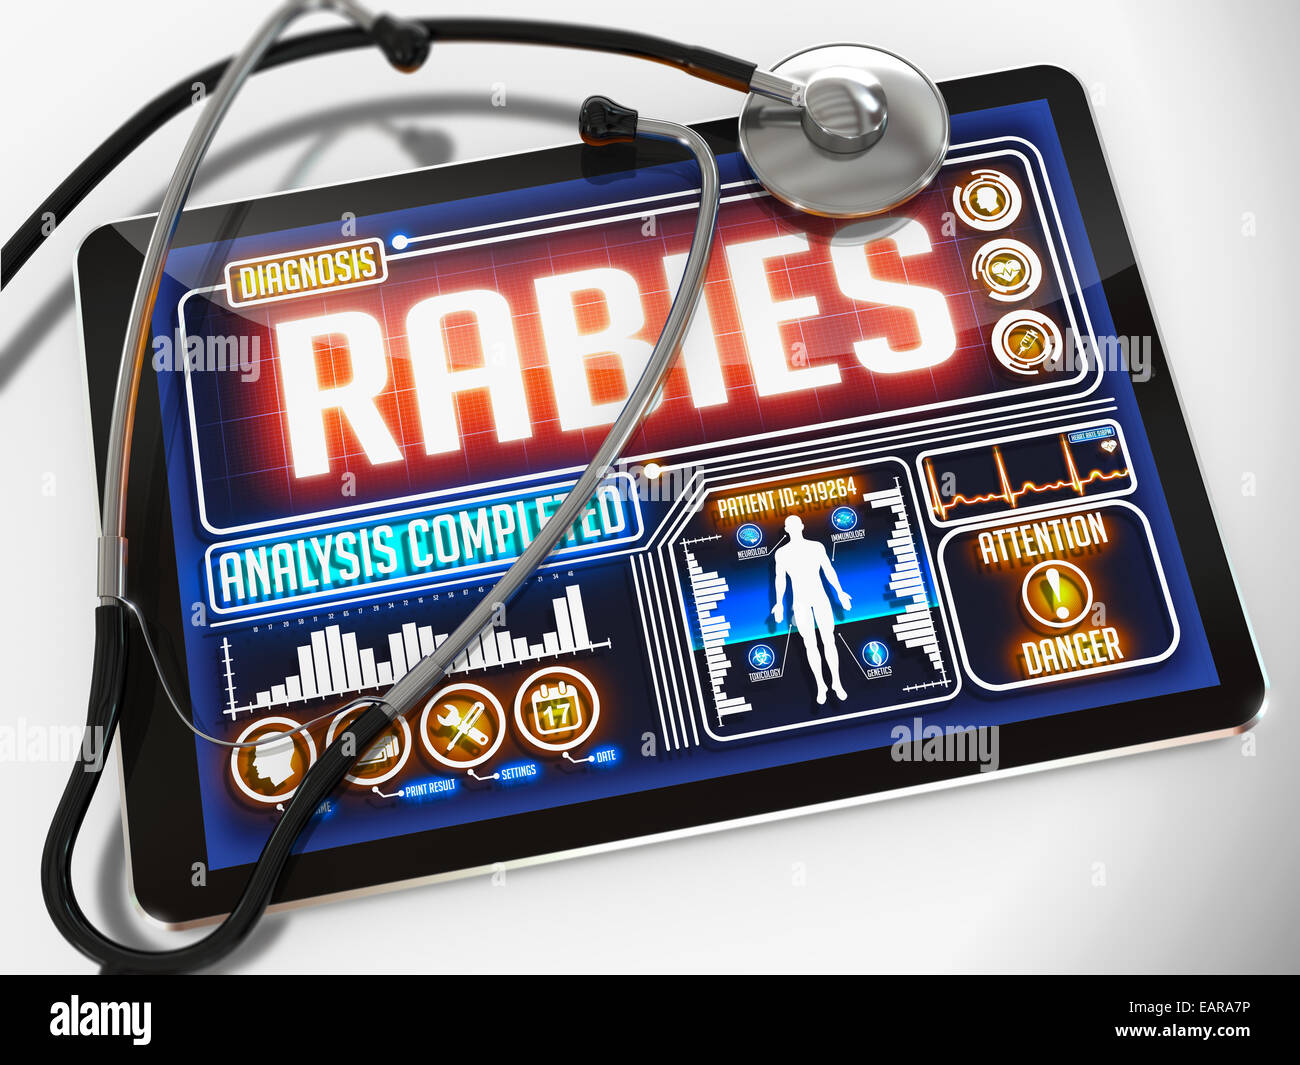 Rabies on the Display of Medical Tablet. Stock Photo